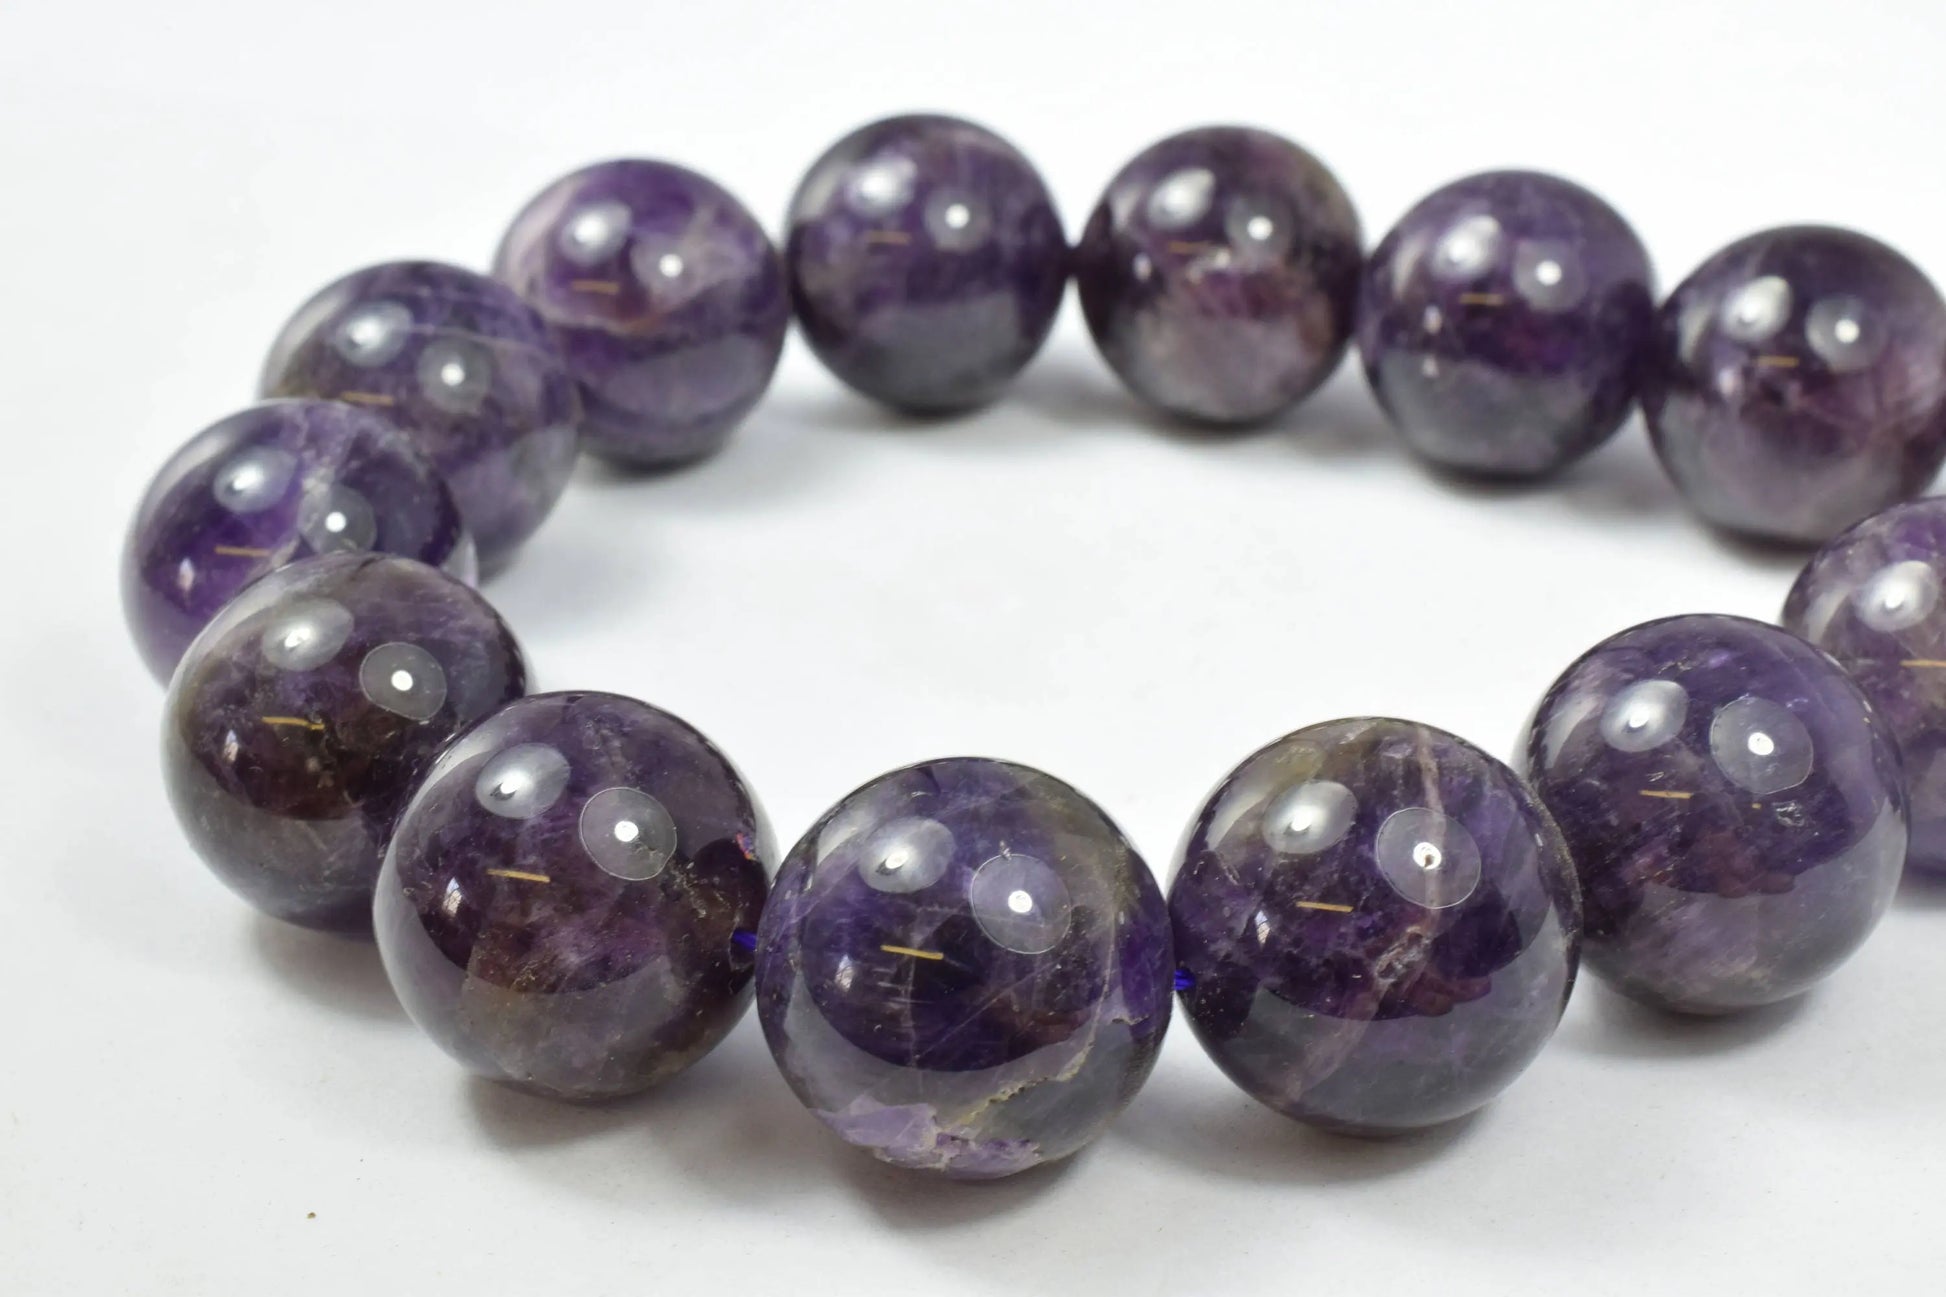 Amethyst Round Gemstone Beads Plain Size 12.5mm for Jewelry Making Sold by 15.5 inch String,Amethyst Jewelry,Amethyst stones - BeadsFindingDepot